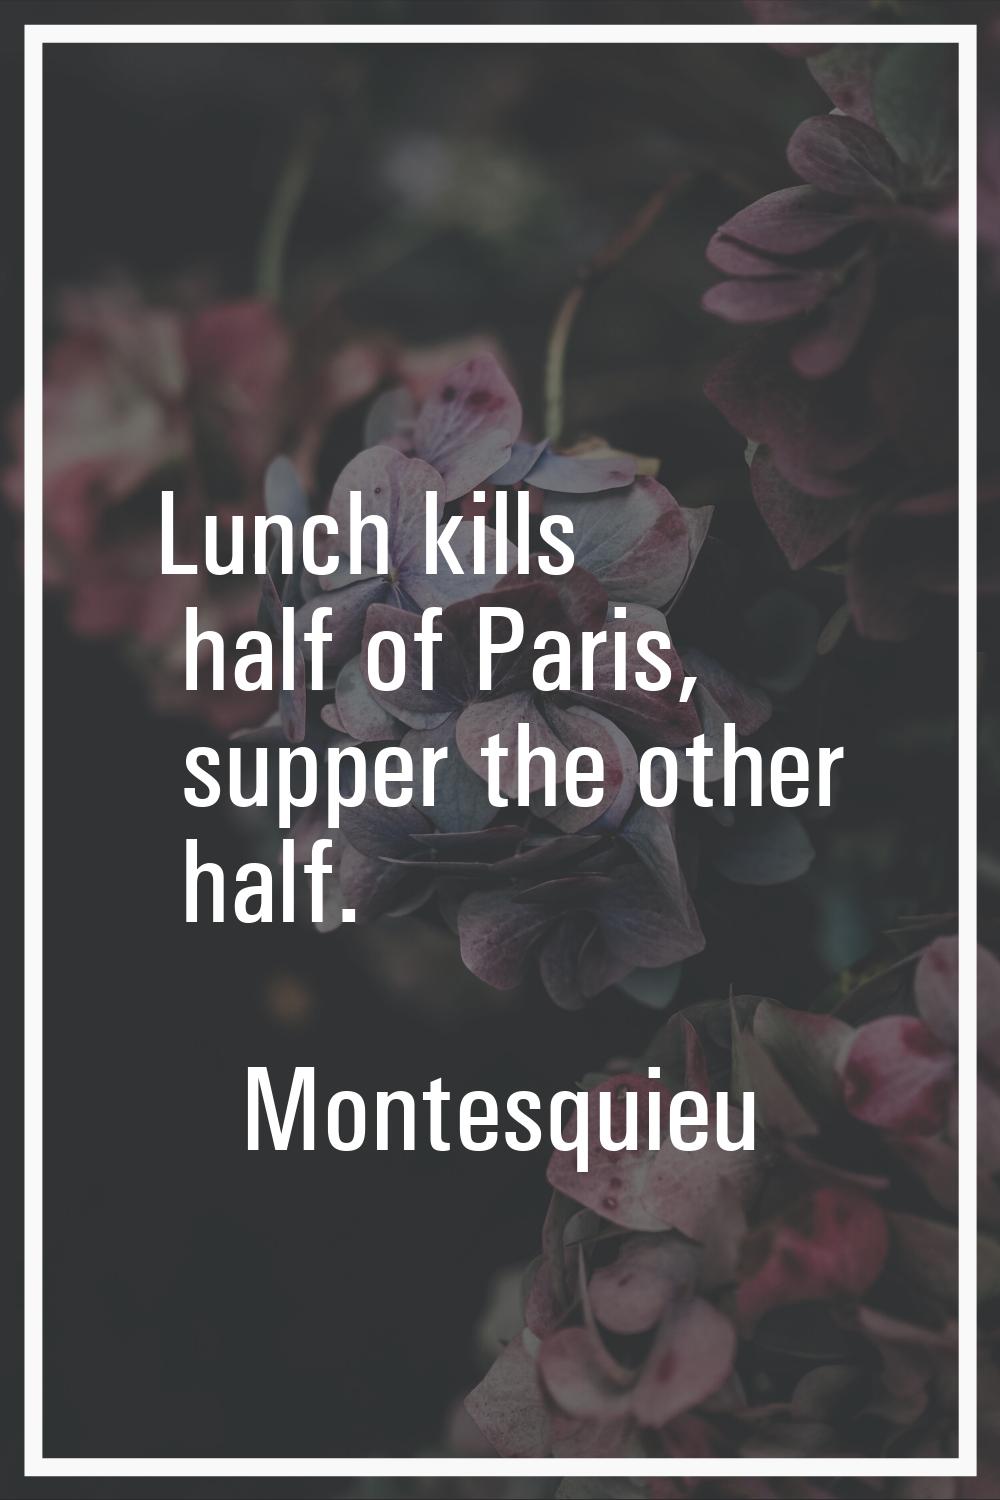 Lunch kills half of Paris, supper the other half.